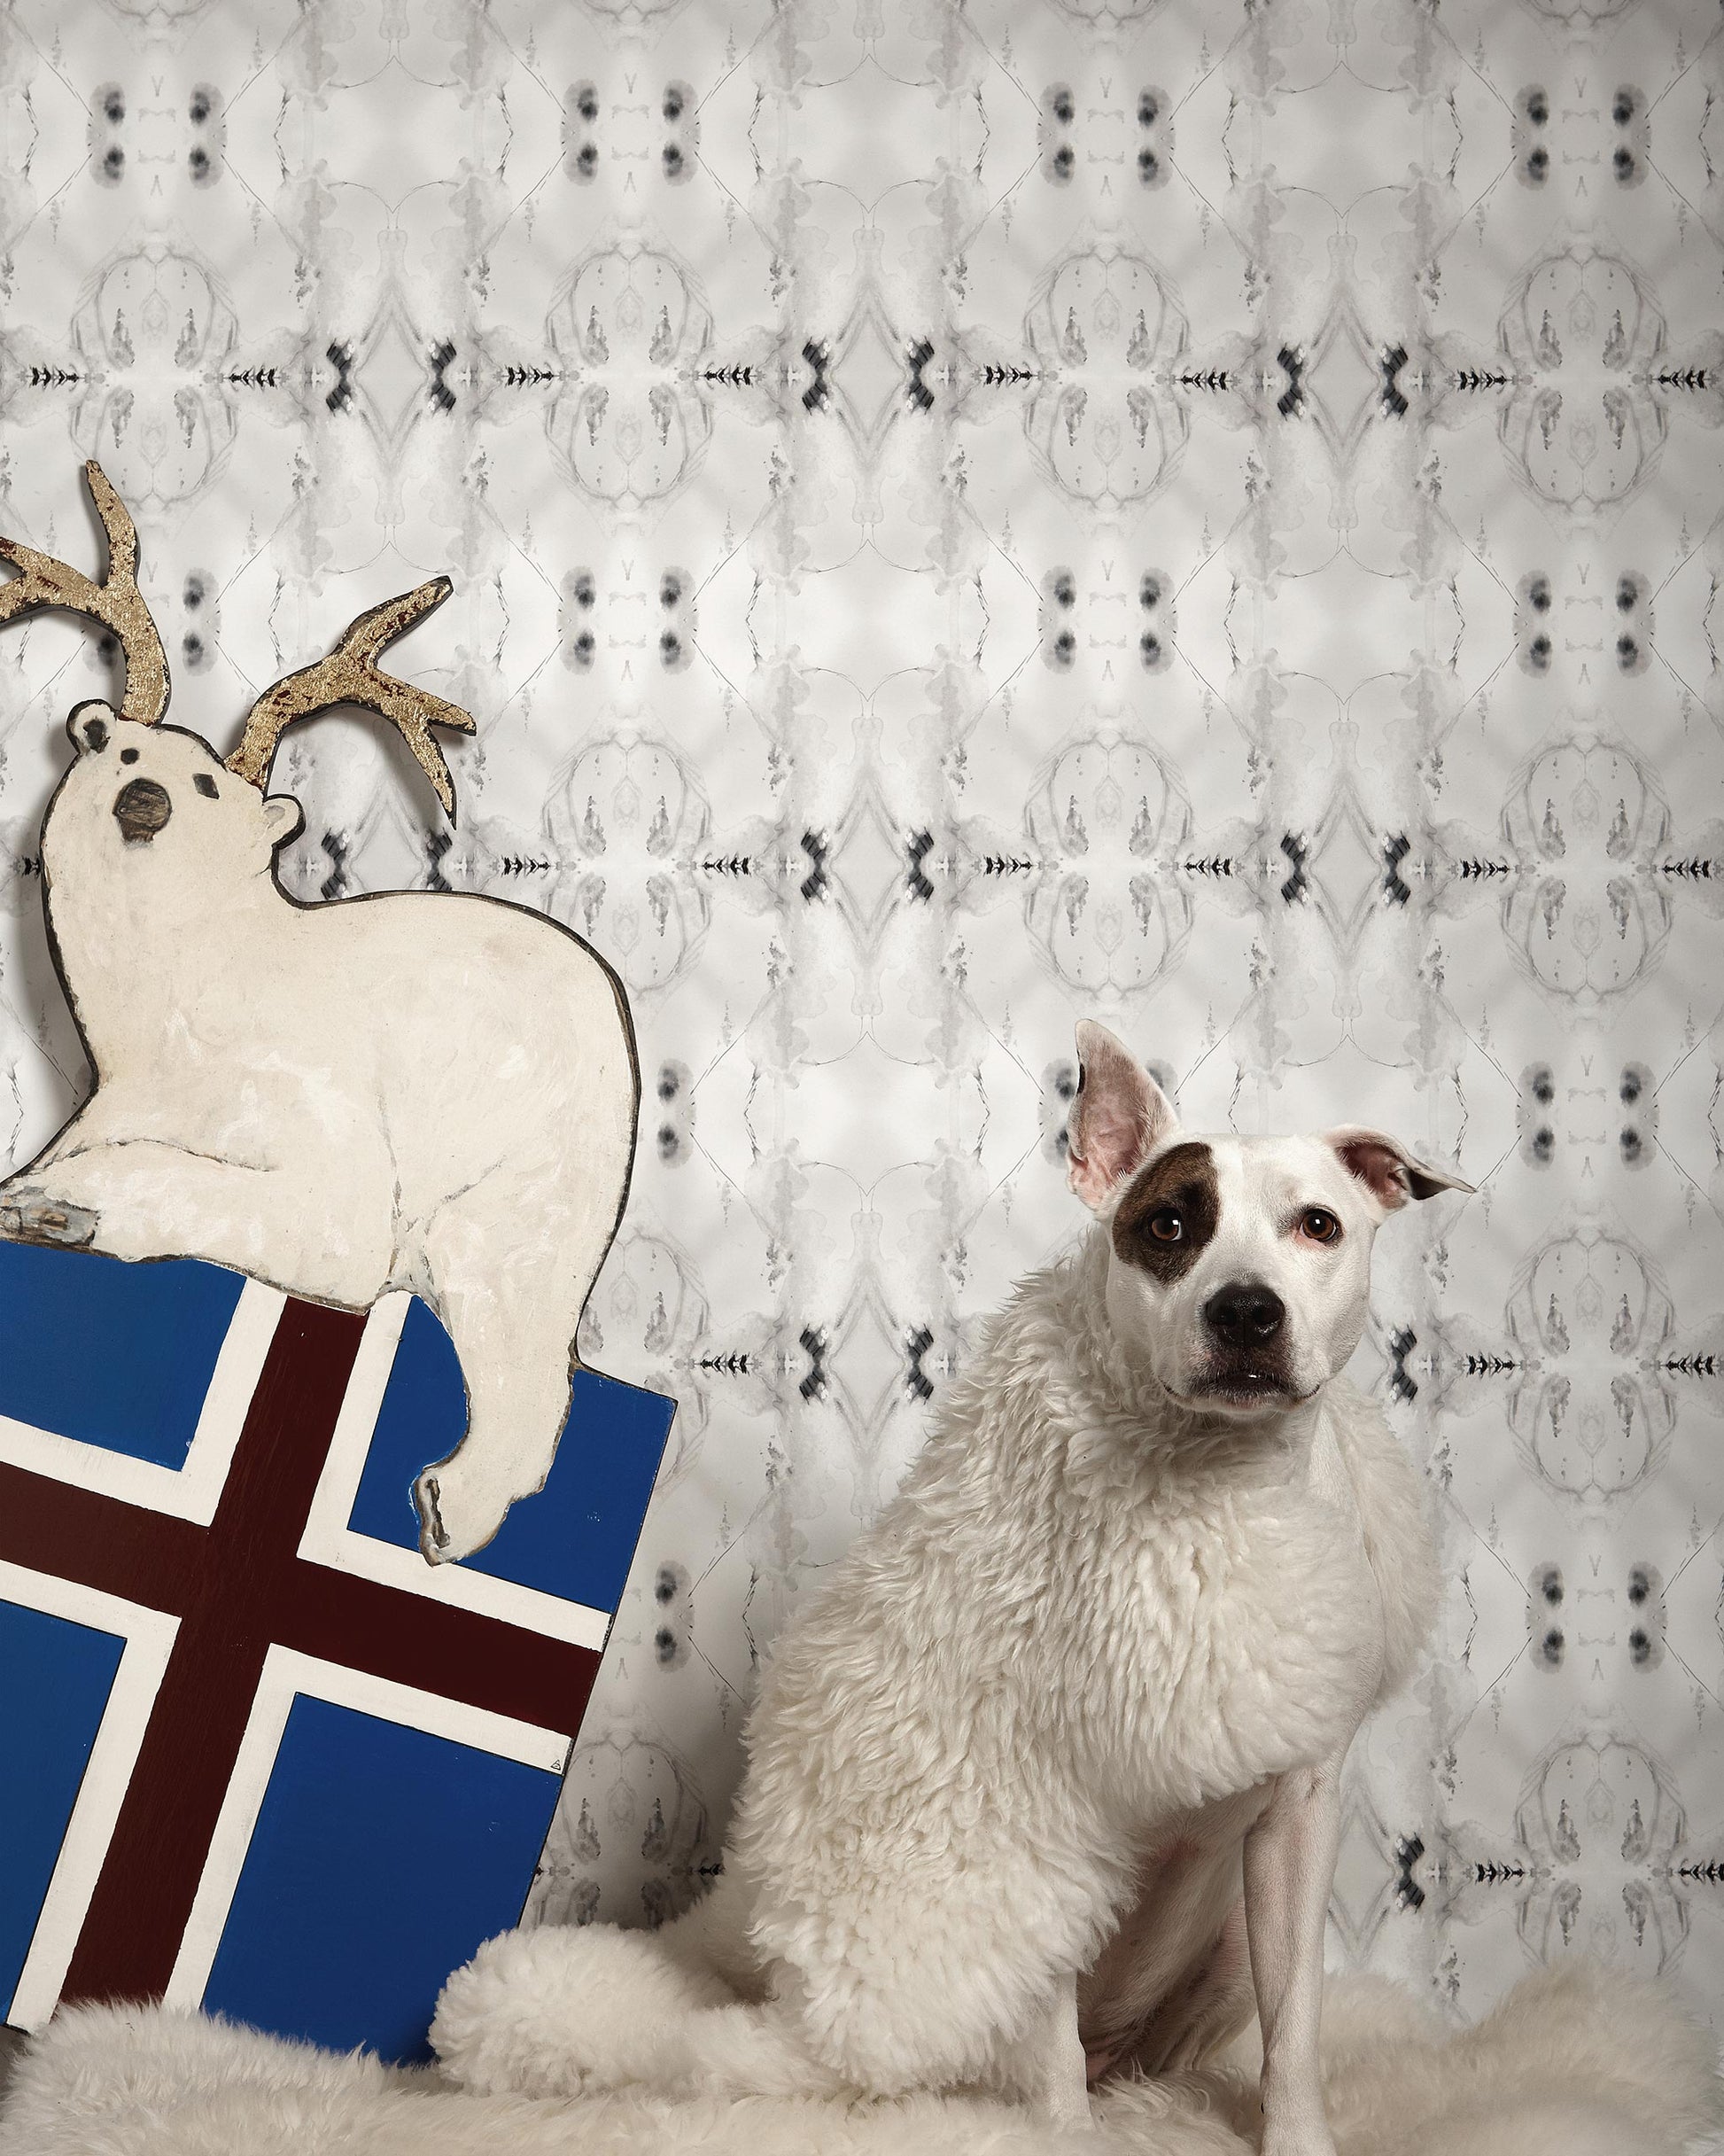 A dog is sitting next to a reindeer and a Polar Pedigree Wallpaper in greyscale